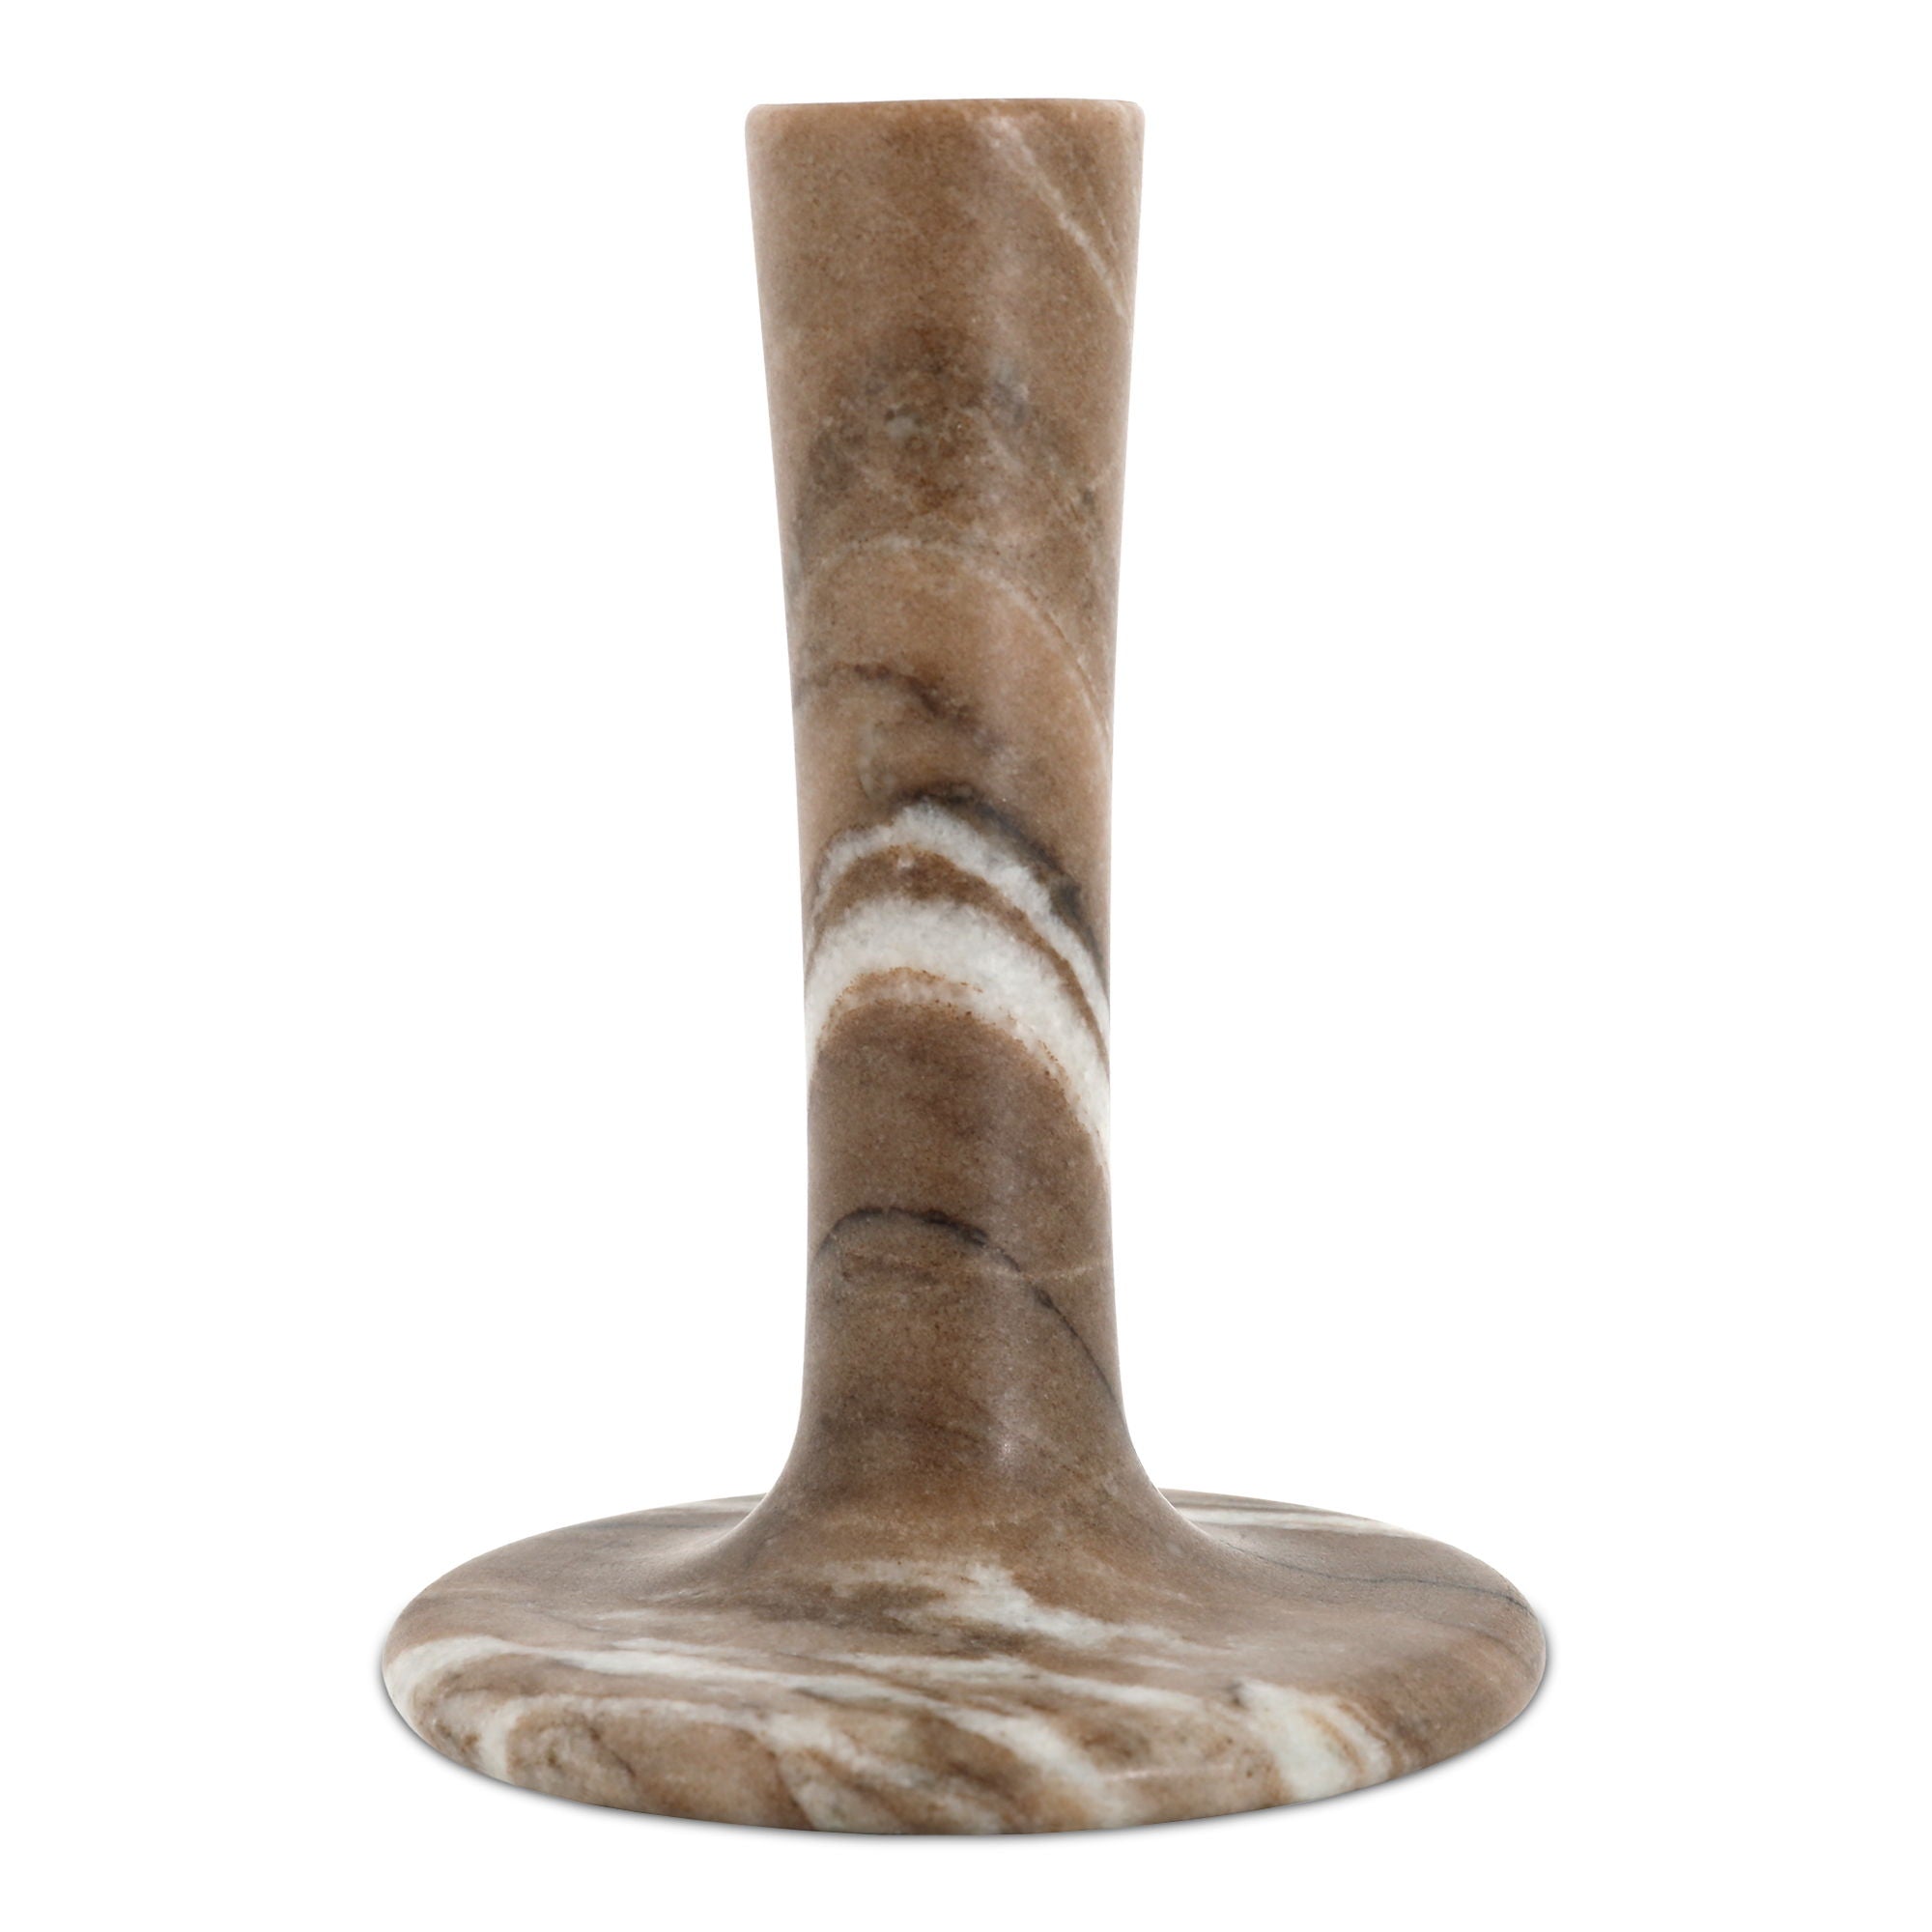 East - Candle Holder Tall - Beige